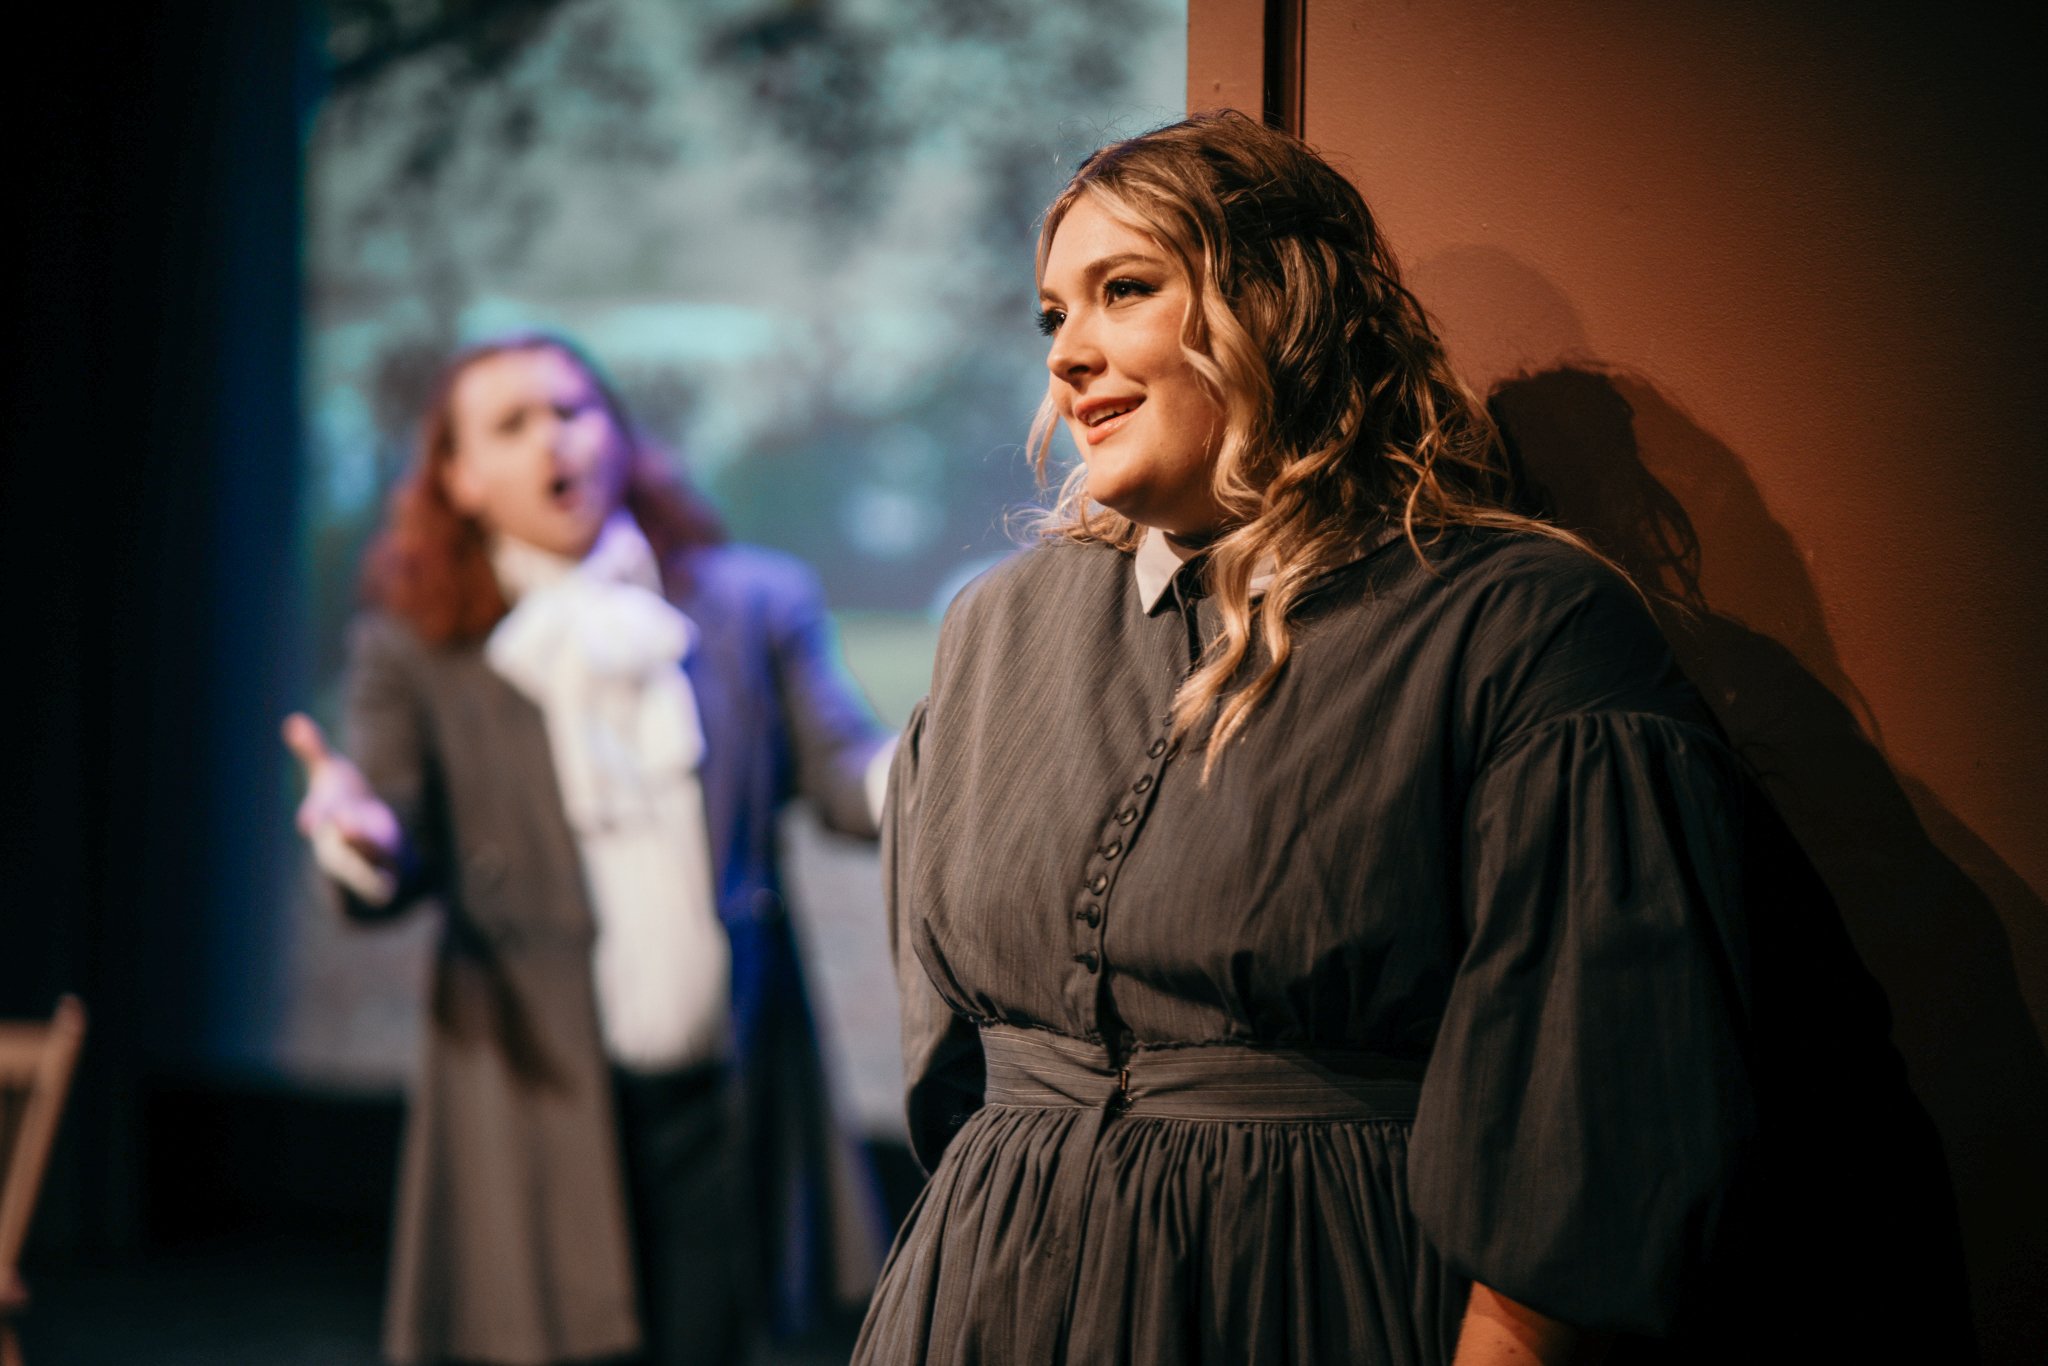  “Simona Genga was a flirtatious, effervescent Olga, her lush voice leaving the audience wanting to hear more.”&nbsp;- Highlands Opera, Eugene Onegin - Dawn Martens 